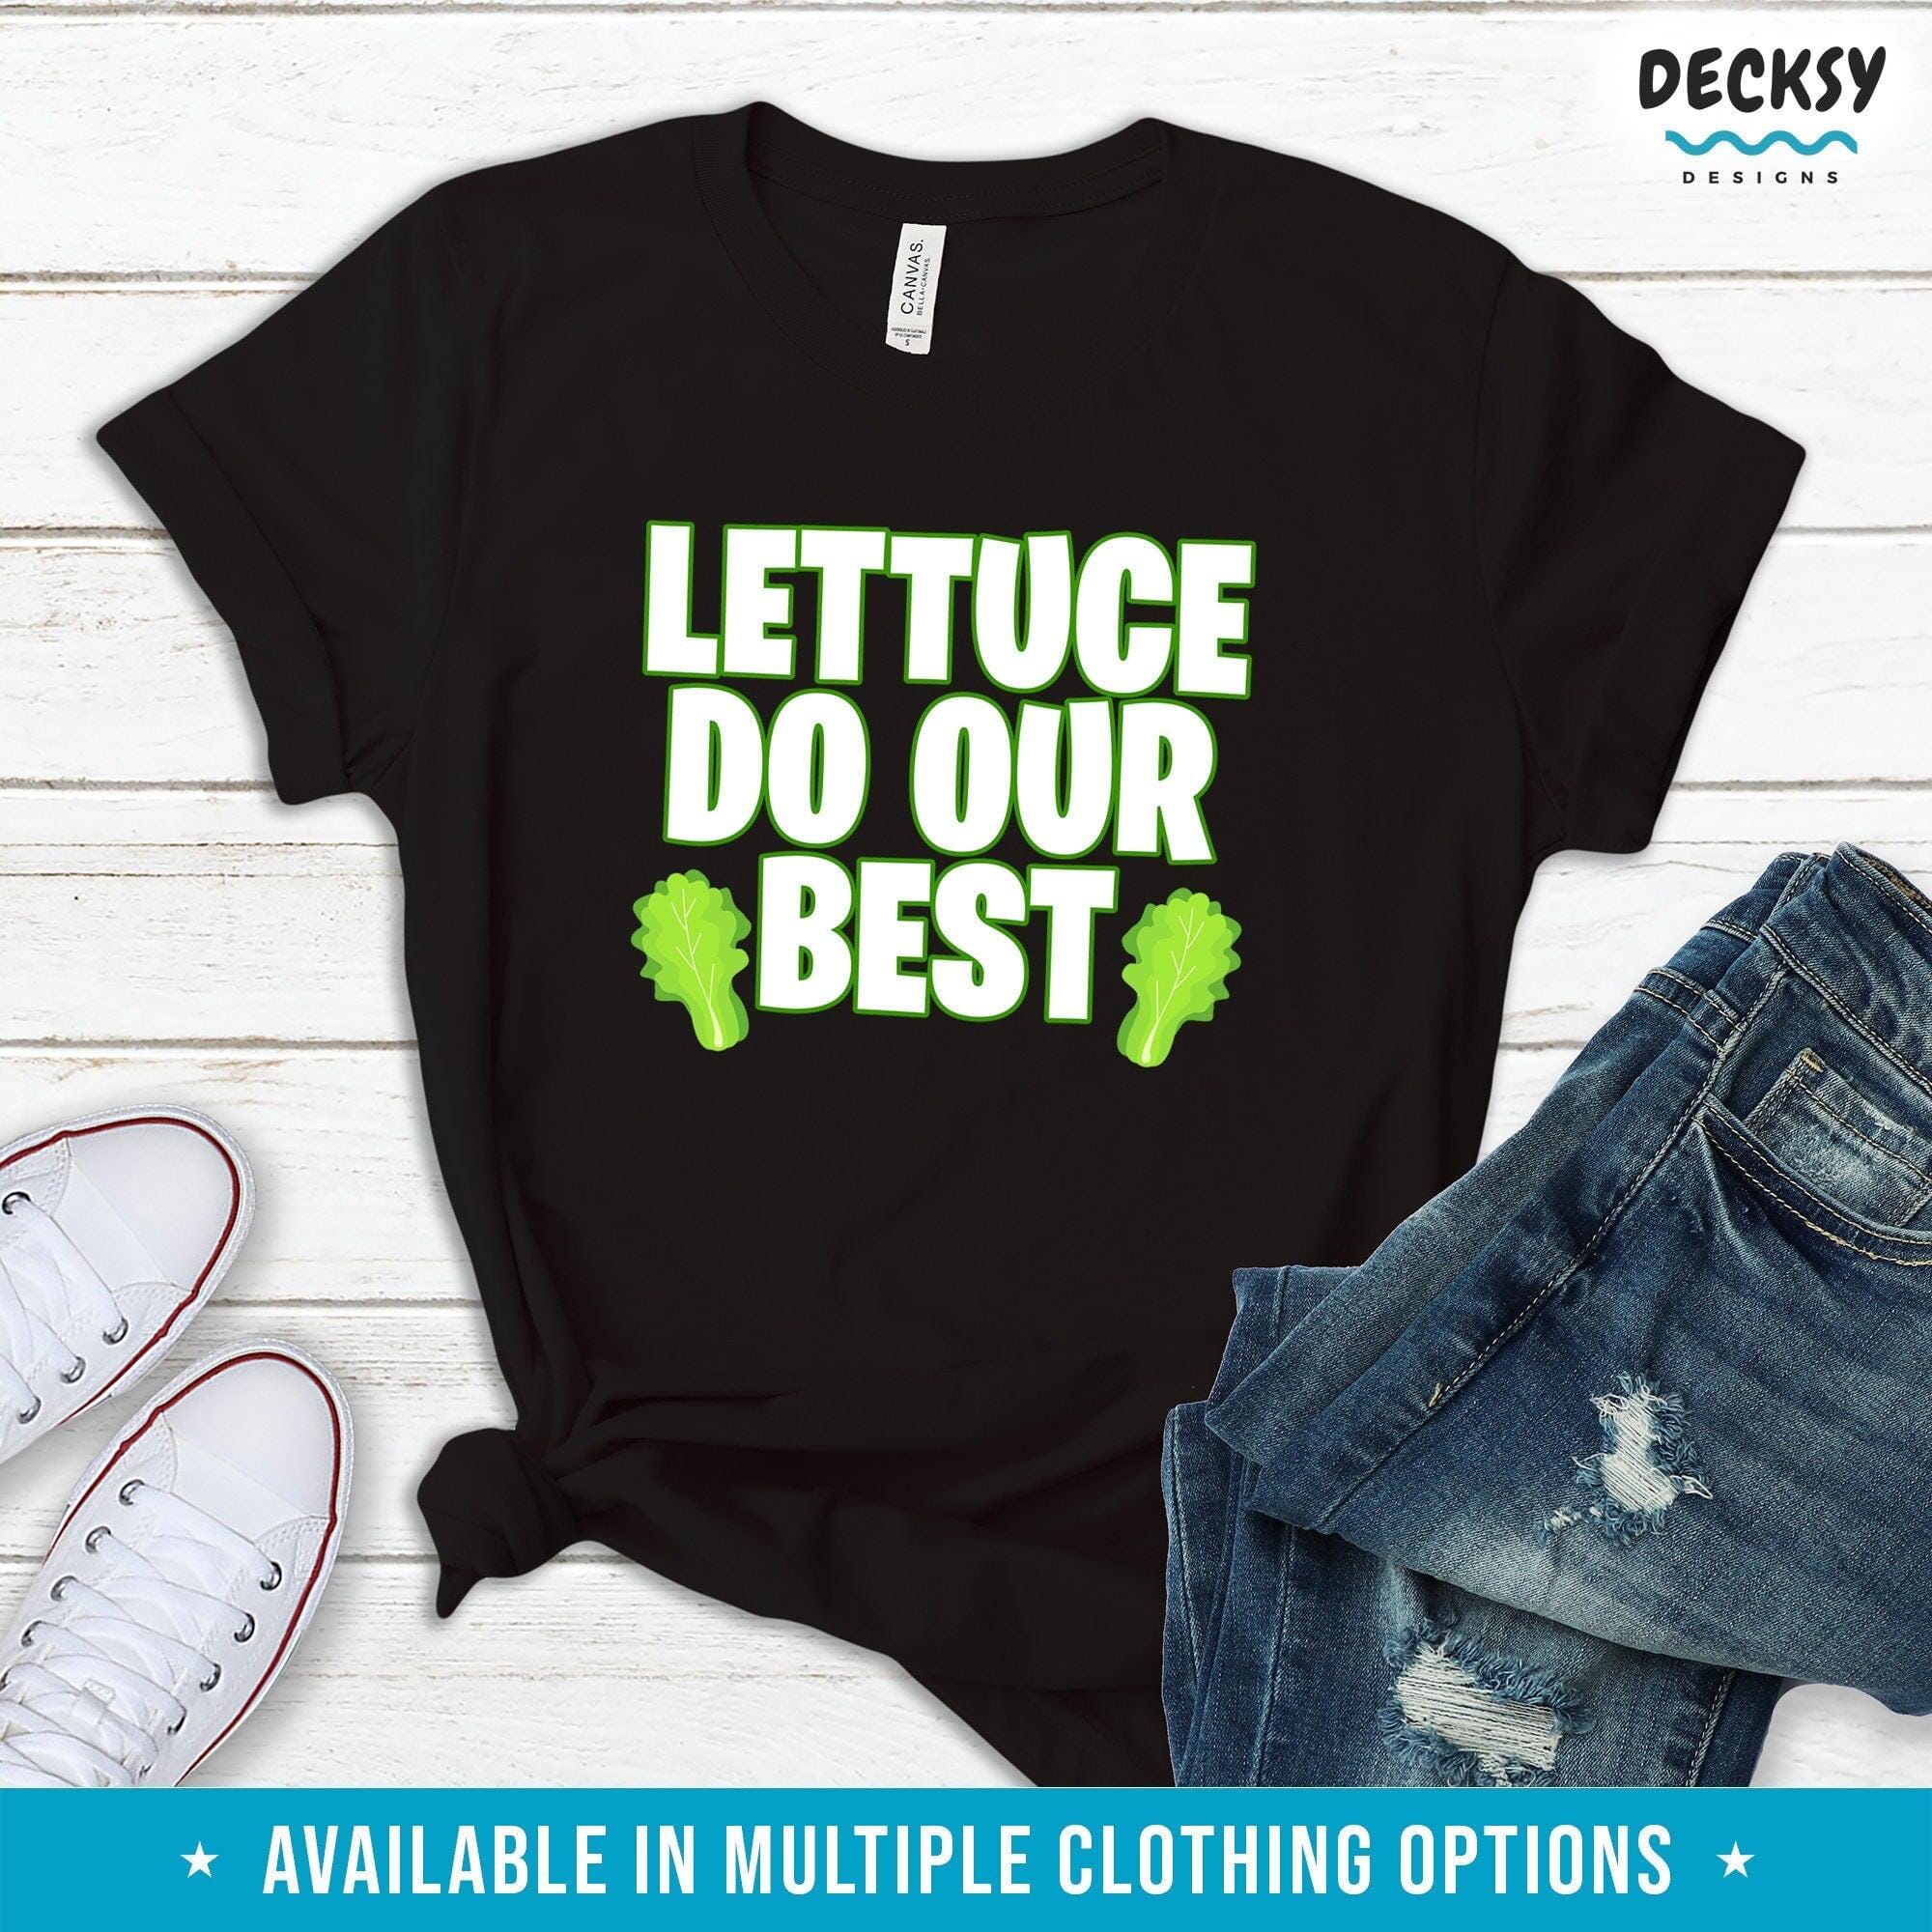 Motivational Shirt, Cute Vegan Gift-Clothing:Gender-Neutral Adult Clothing:Tops & Tees:T-shirts:Graphic Tees-DecksyDesigns